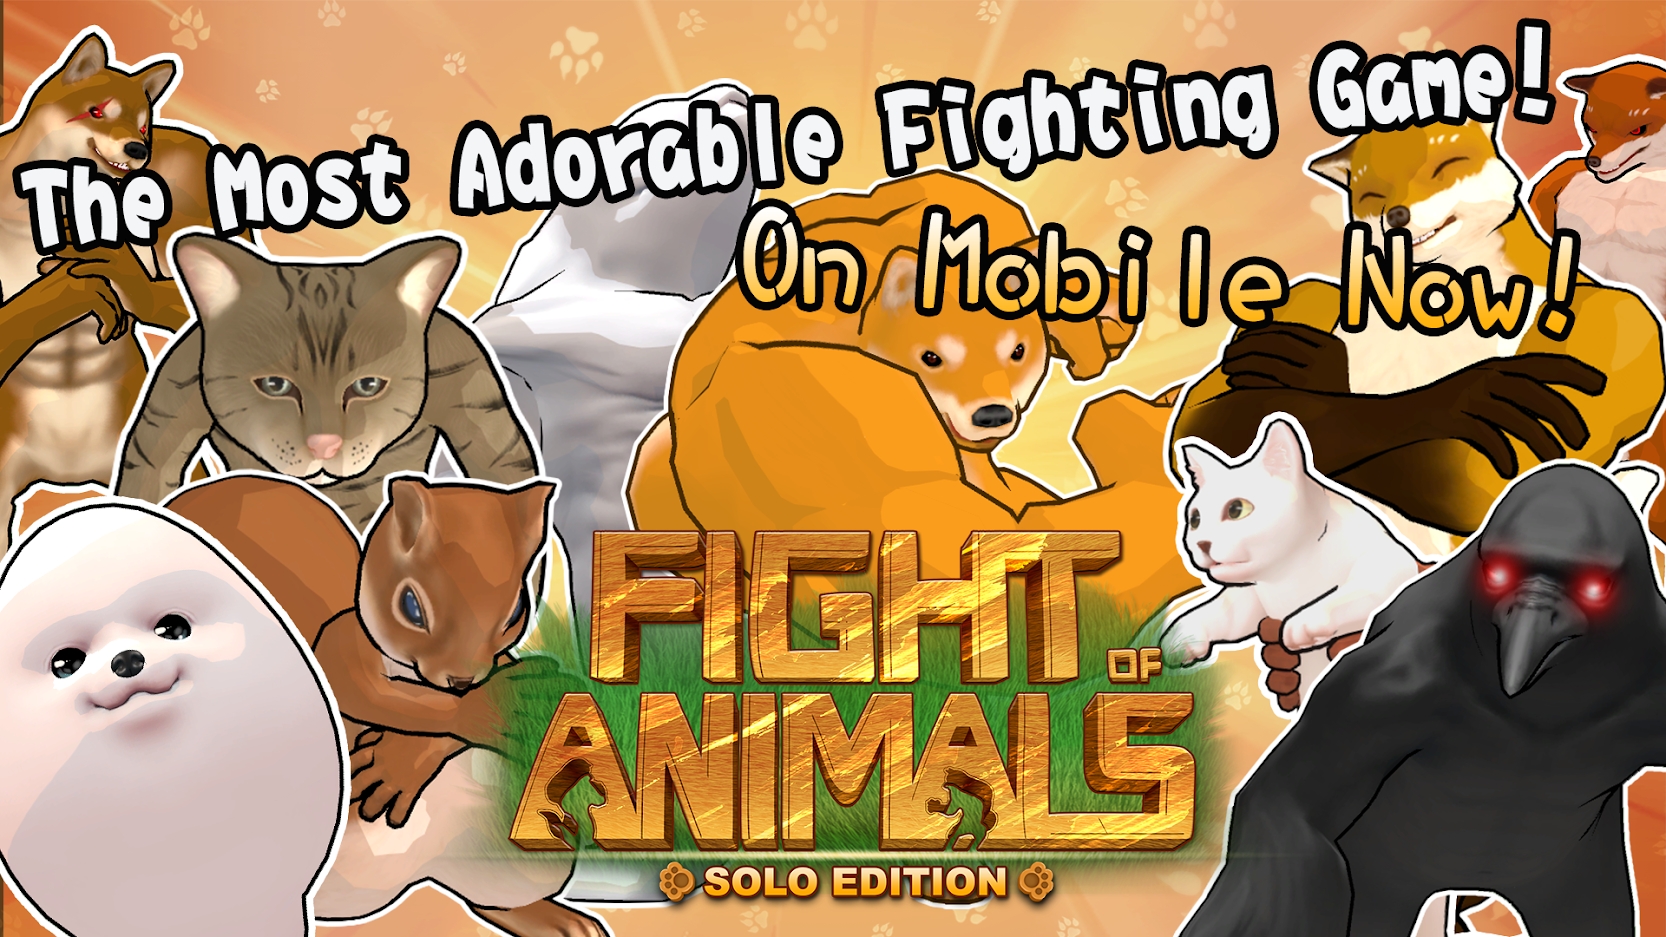 Meme Animal Brawler Game Fight Of Animals Now Available On Mobile As Solo Game